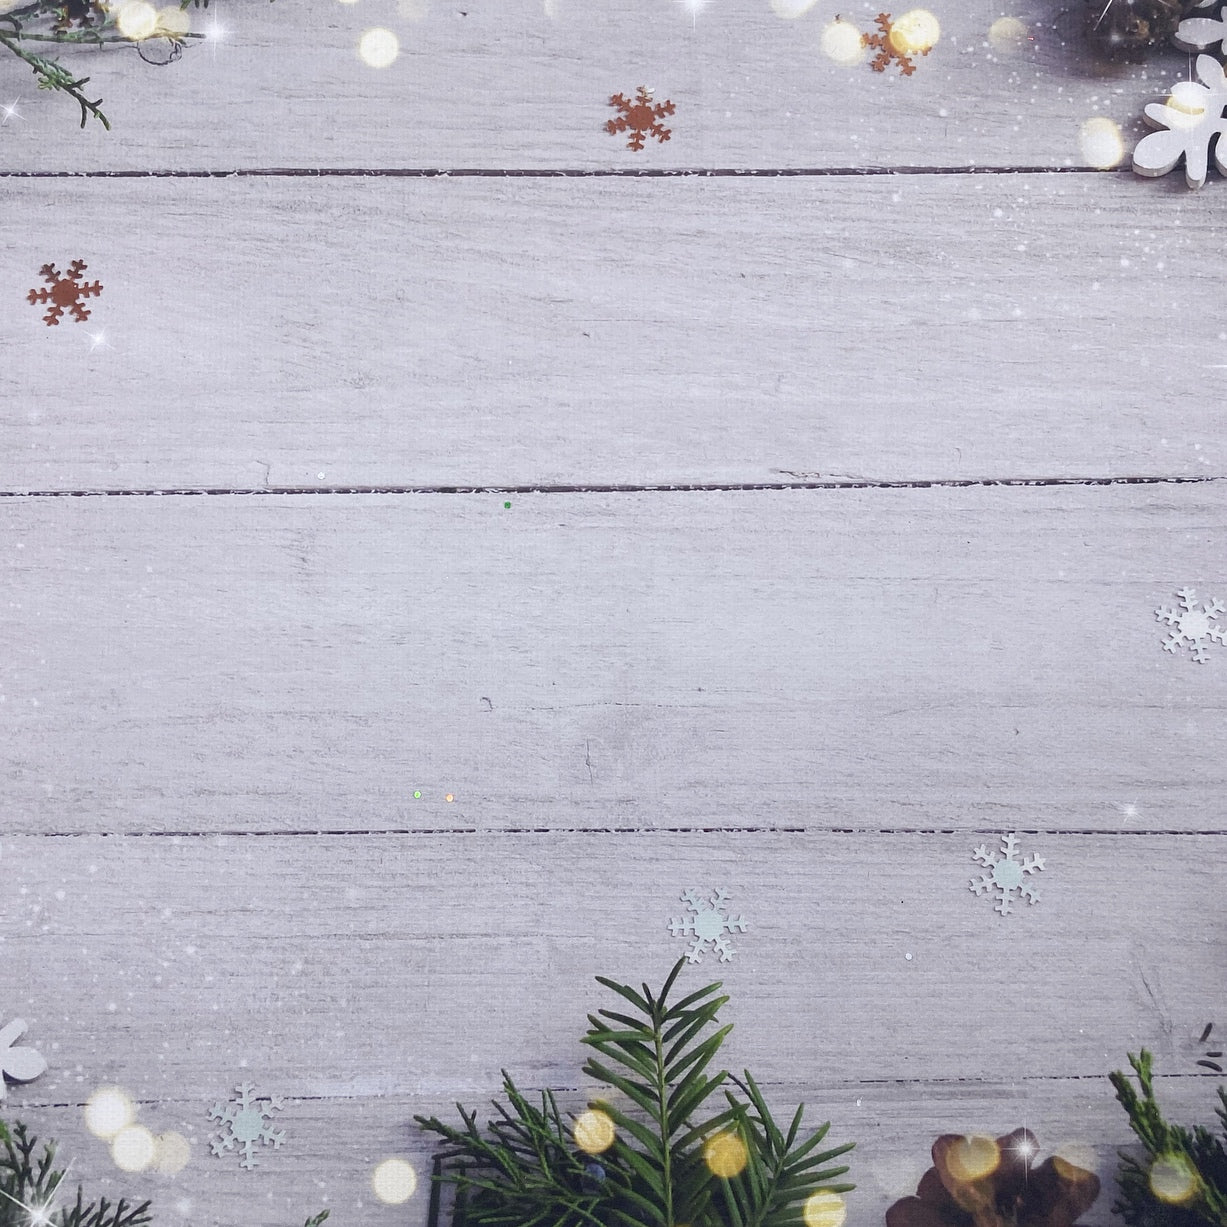 Snowflake Wooden Effect Canvas Photography Background